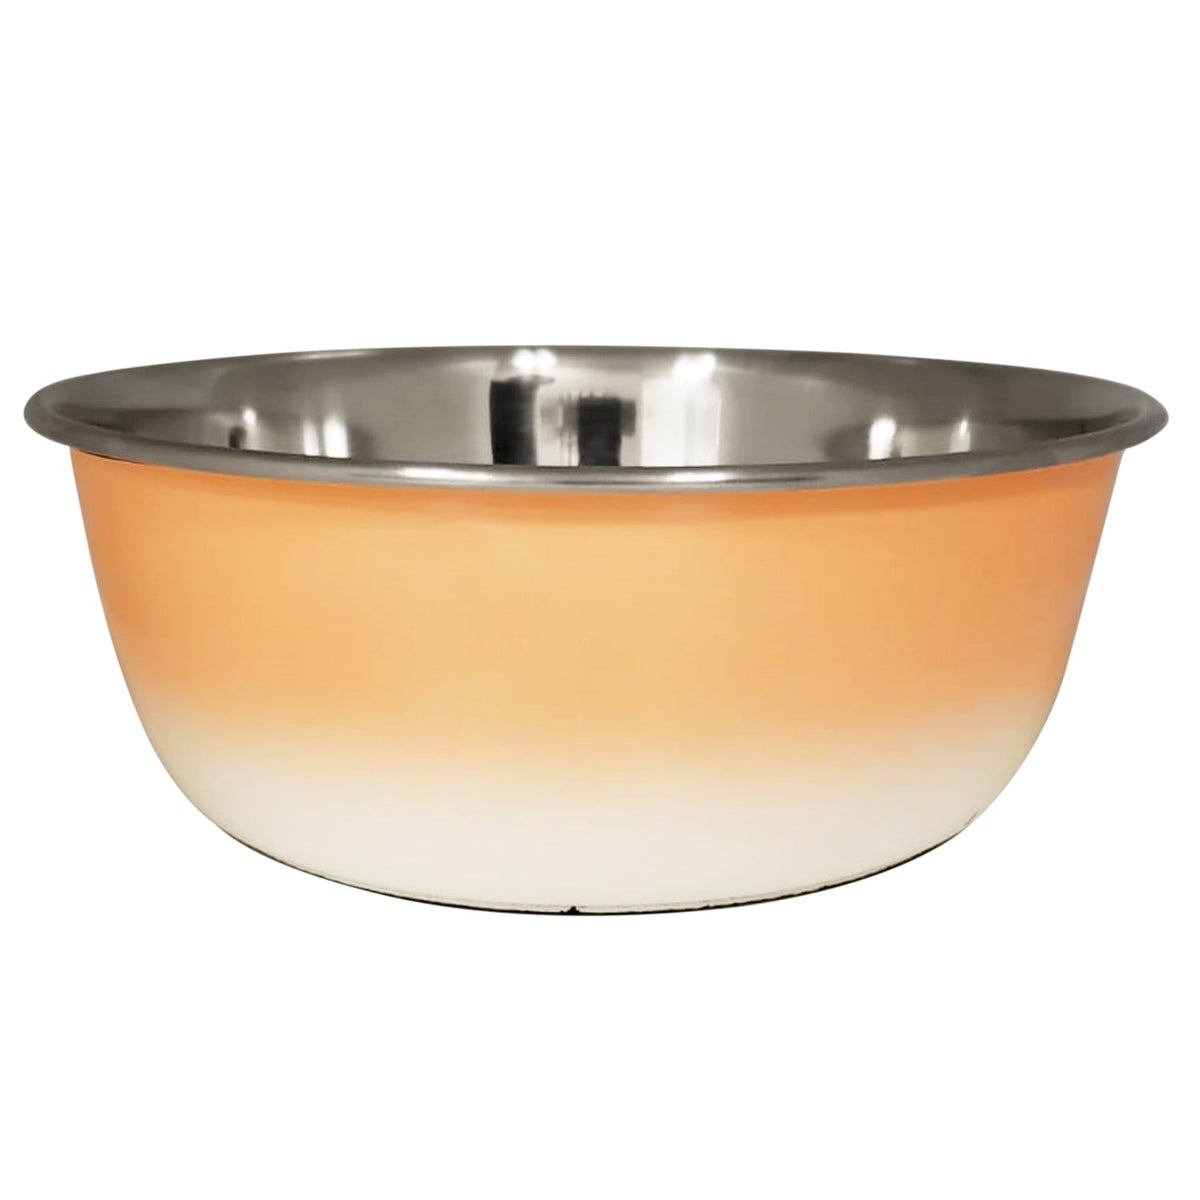 DUROBOLZ Ombre Deep Bowl with Rubber Bottom - Stainless Steel - Coral Peach by American Pet Supplies